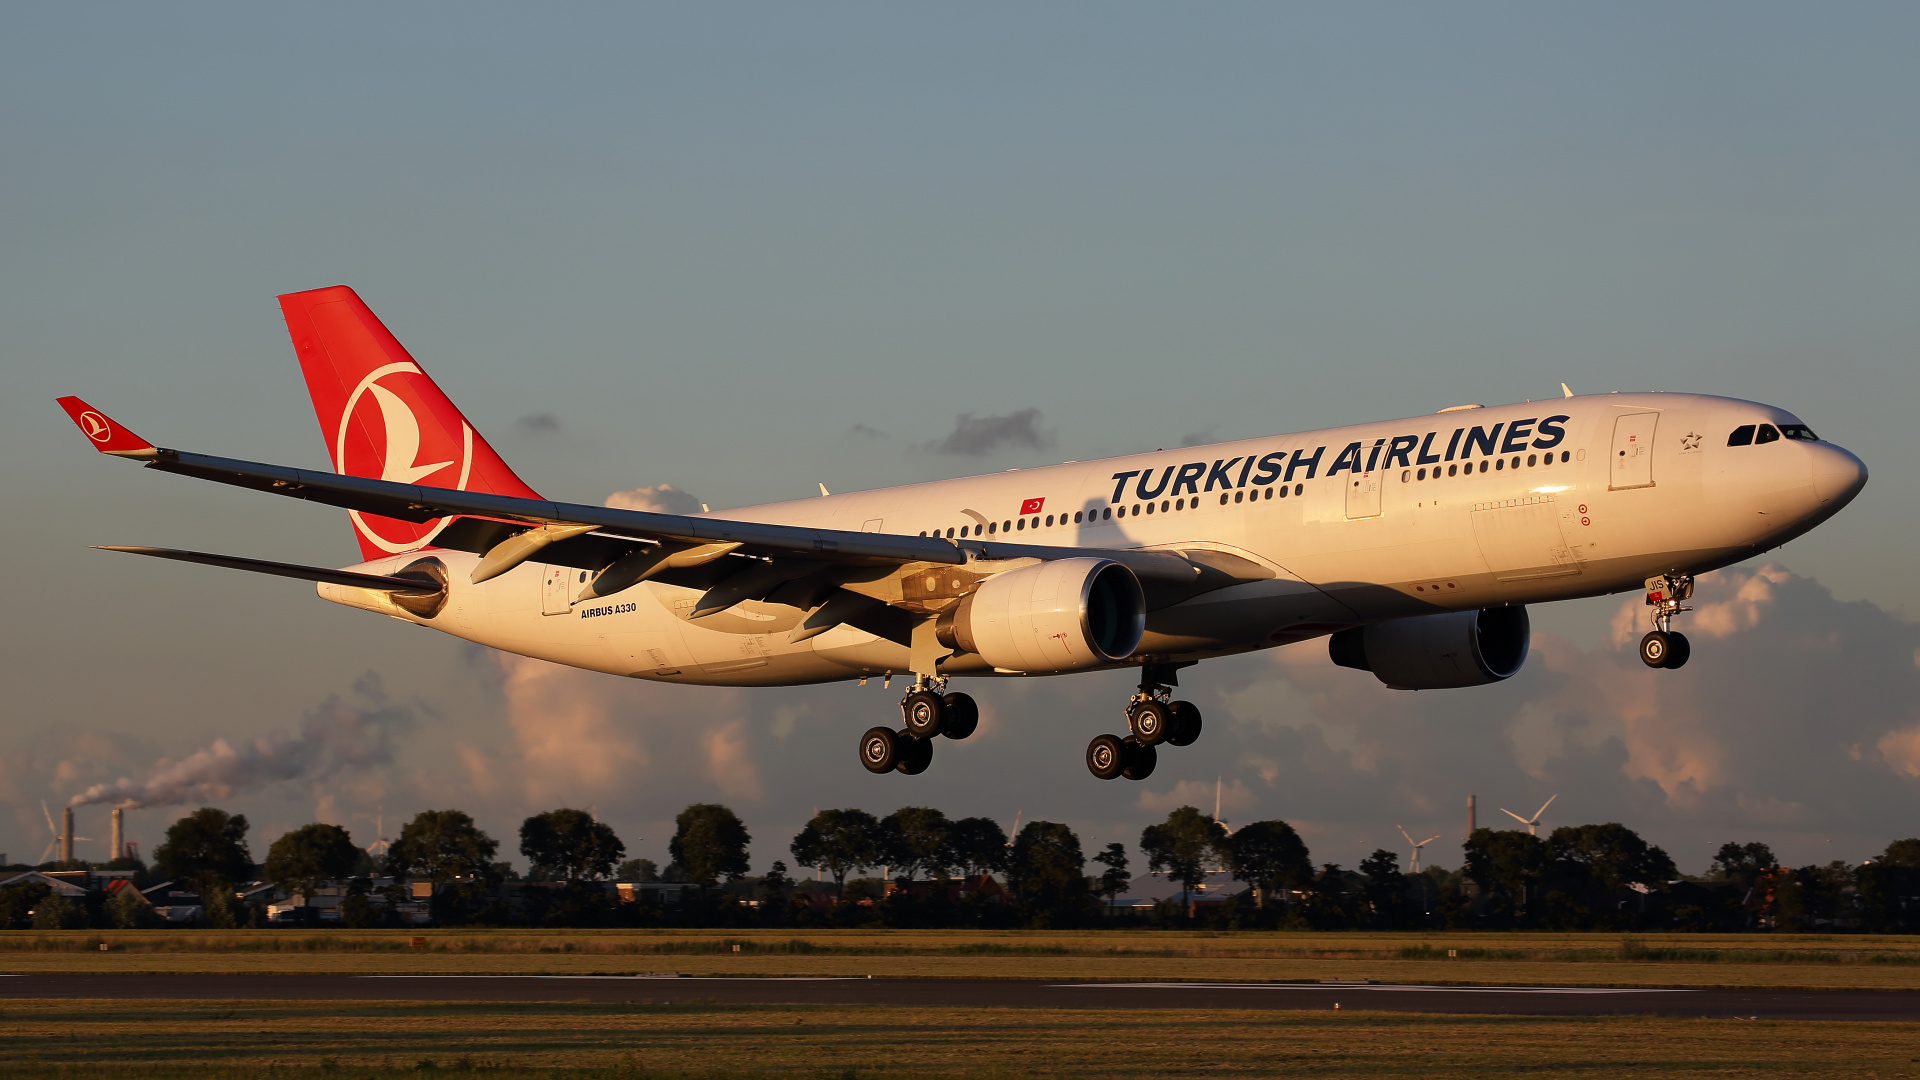 TC-JIS (Aircraft » Schiphol Spotting » Airbus A330-200 » THY Turkish Airlines)